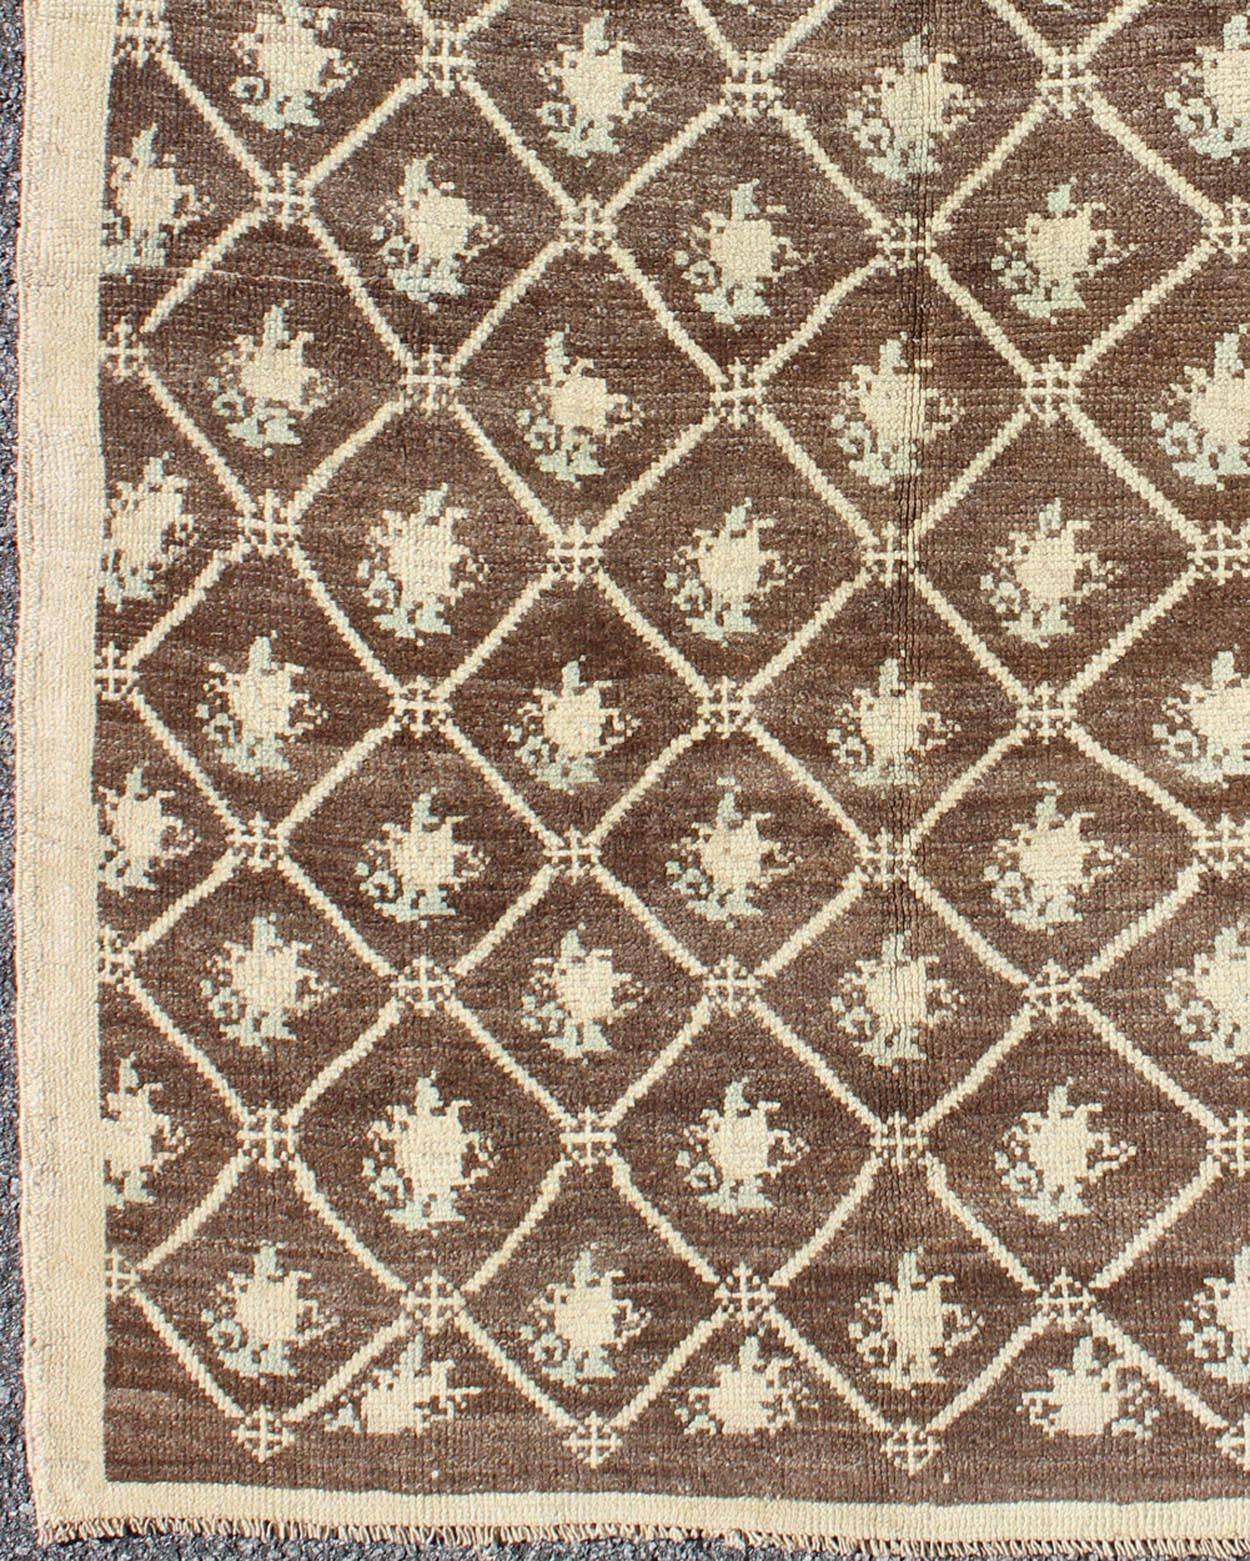 Turkish Tulu Carpet in Shades of Brown, rug TU-ALK-3561 , country of origin / type: Turkey / Oushak, circa mid-20th Century.

This Tulu carpet features tribal motifs laid across a chocolate brown field and enclosed within an cream border. Tulu rugs